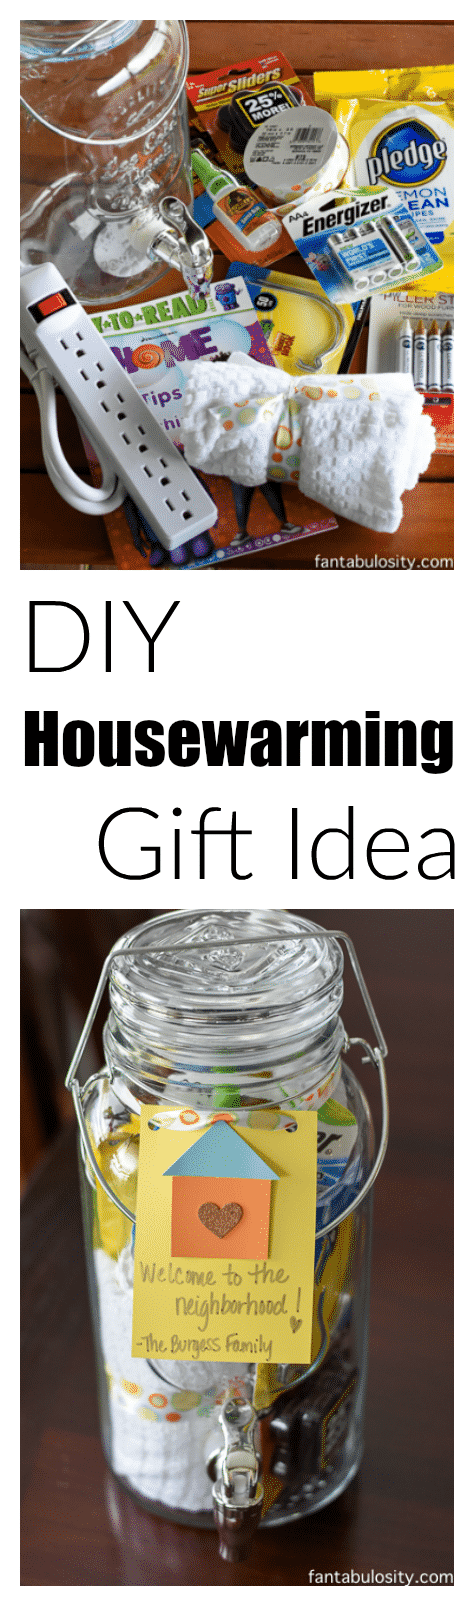 Aw, how cool is this! DIY Housewarming Gift Idea! They can even use the drink dispenser again and again!